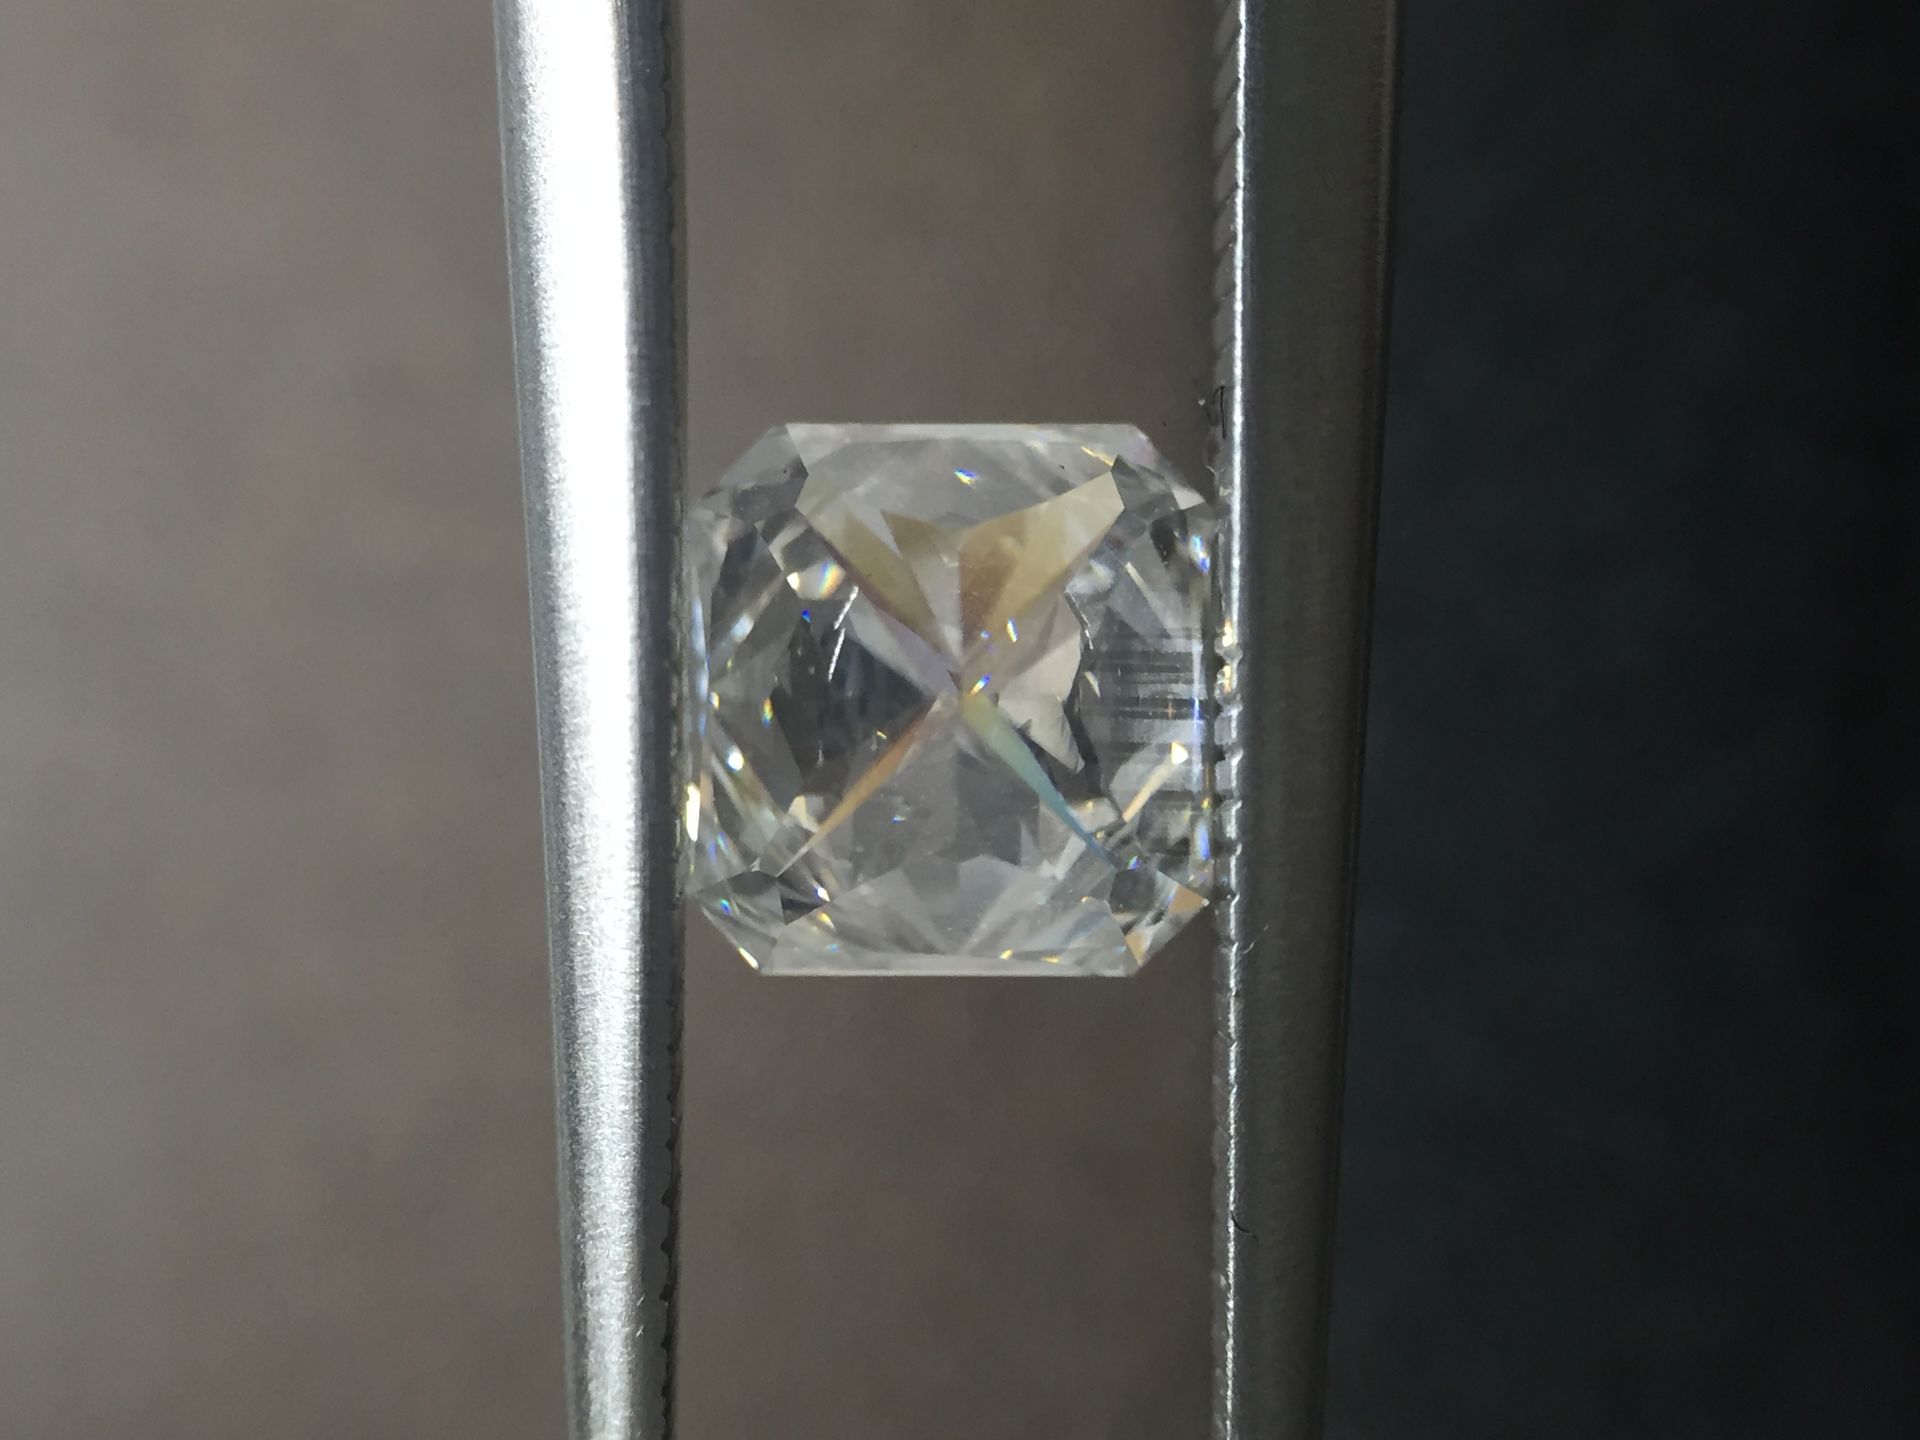 1.03ct radiant cut diamond. F colour, VS1 clarity. GIA certification - 226817812 . 6.03 x 5.78 x 3. - Image 2 of 4